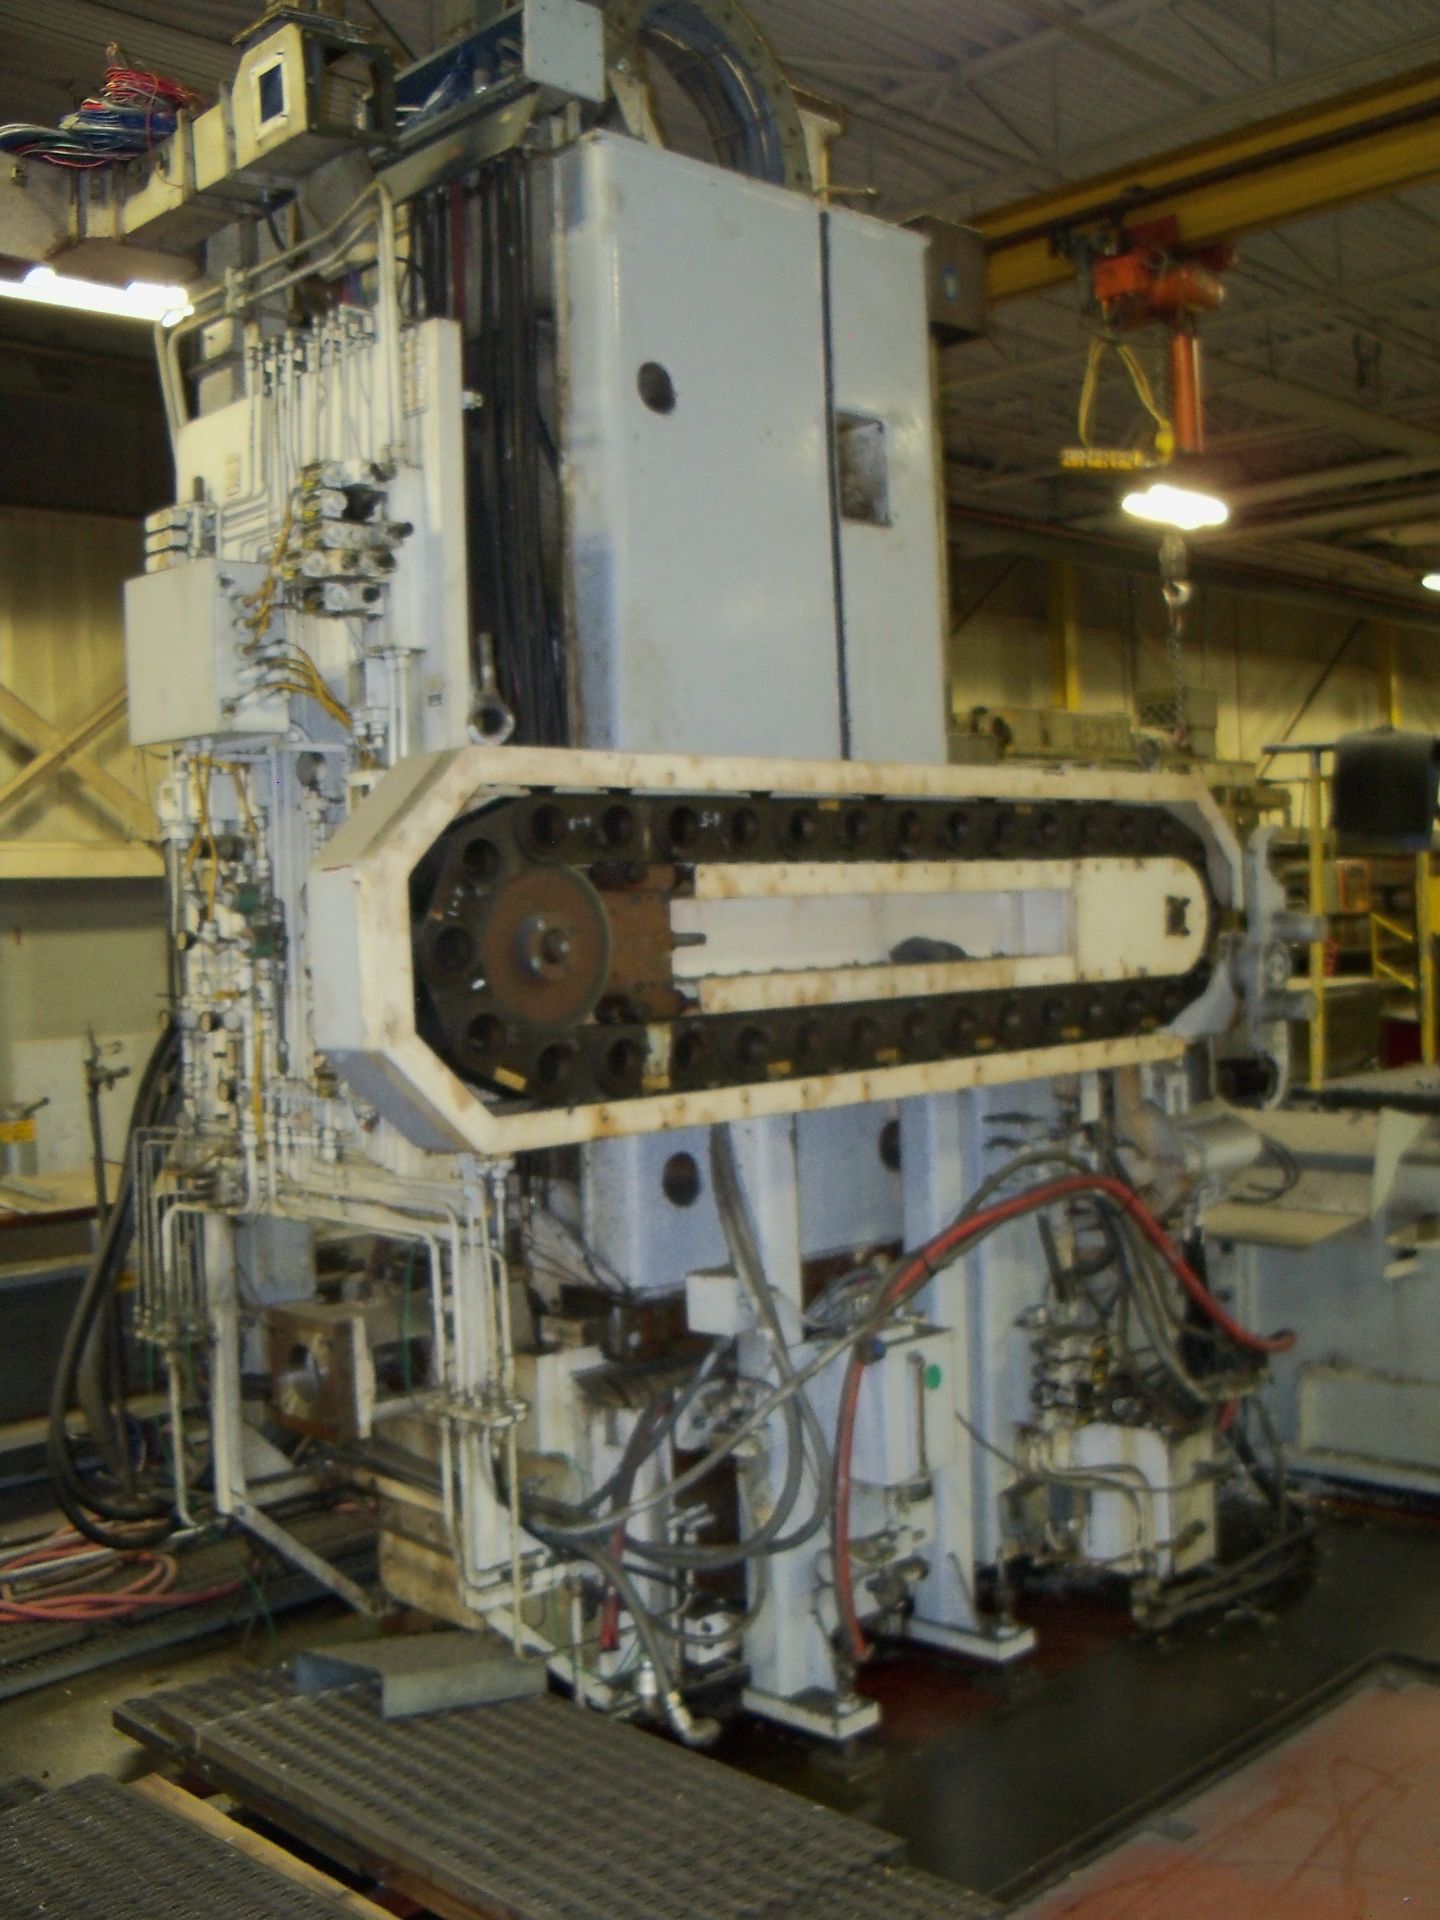 Excello 520 CNC Horizontal Mill, Mitsubishi Ctrl, 32 ATC, Rotary Table (Located in Thomasville, GA) - Image 2 of 10